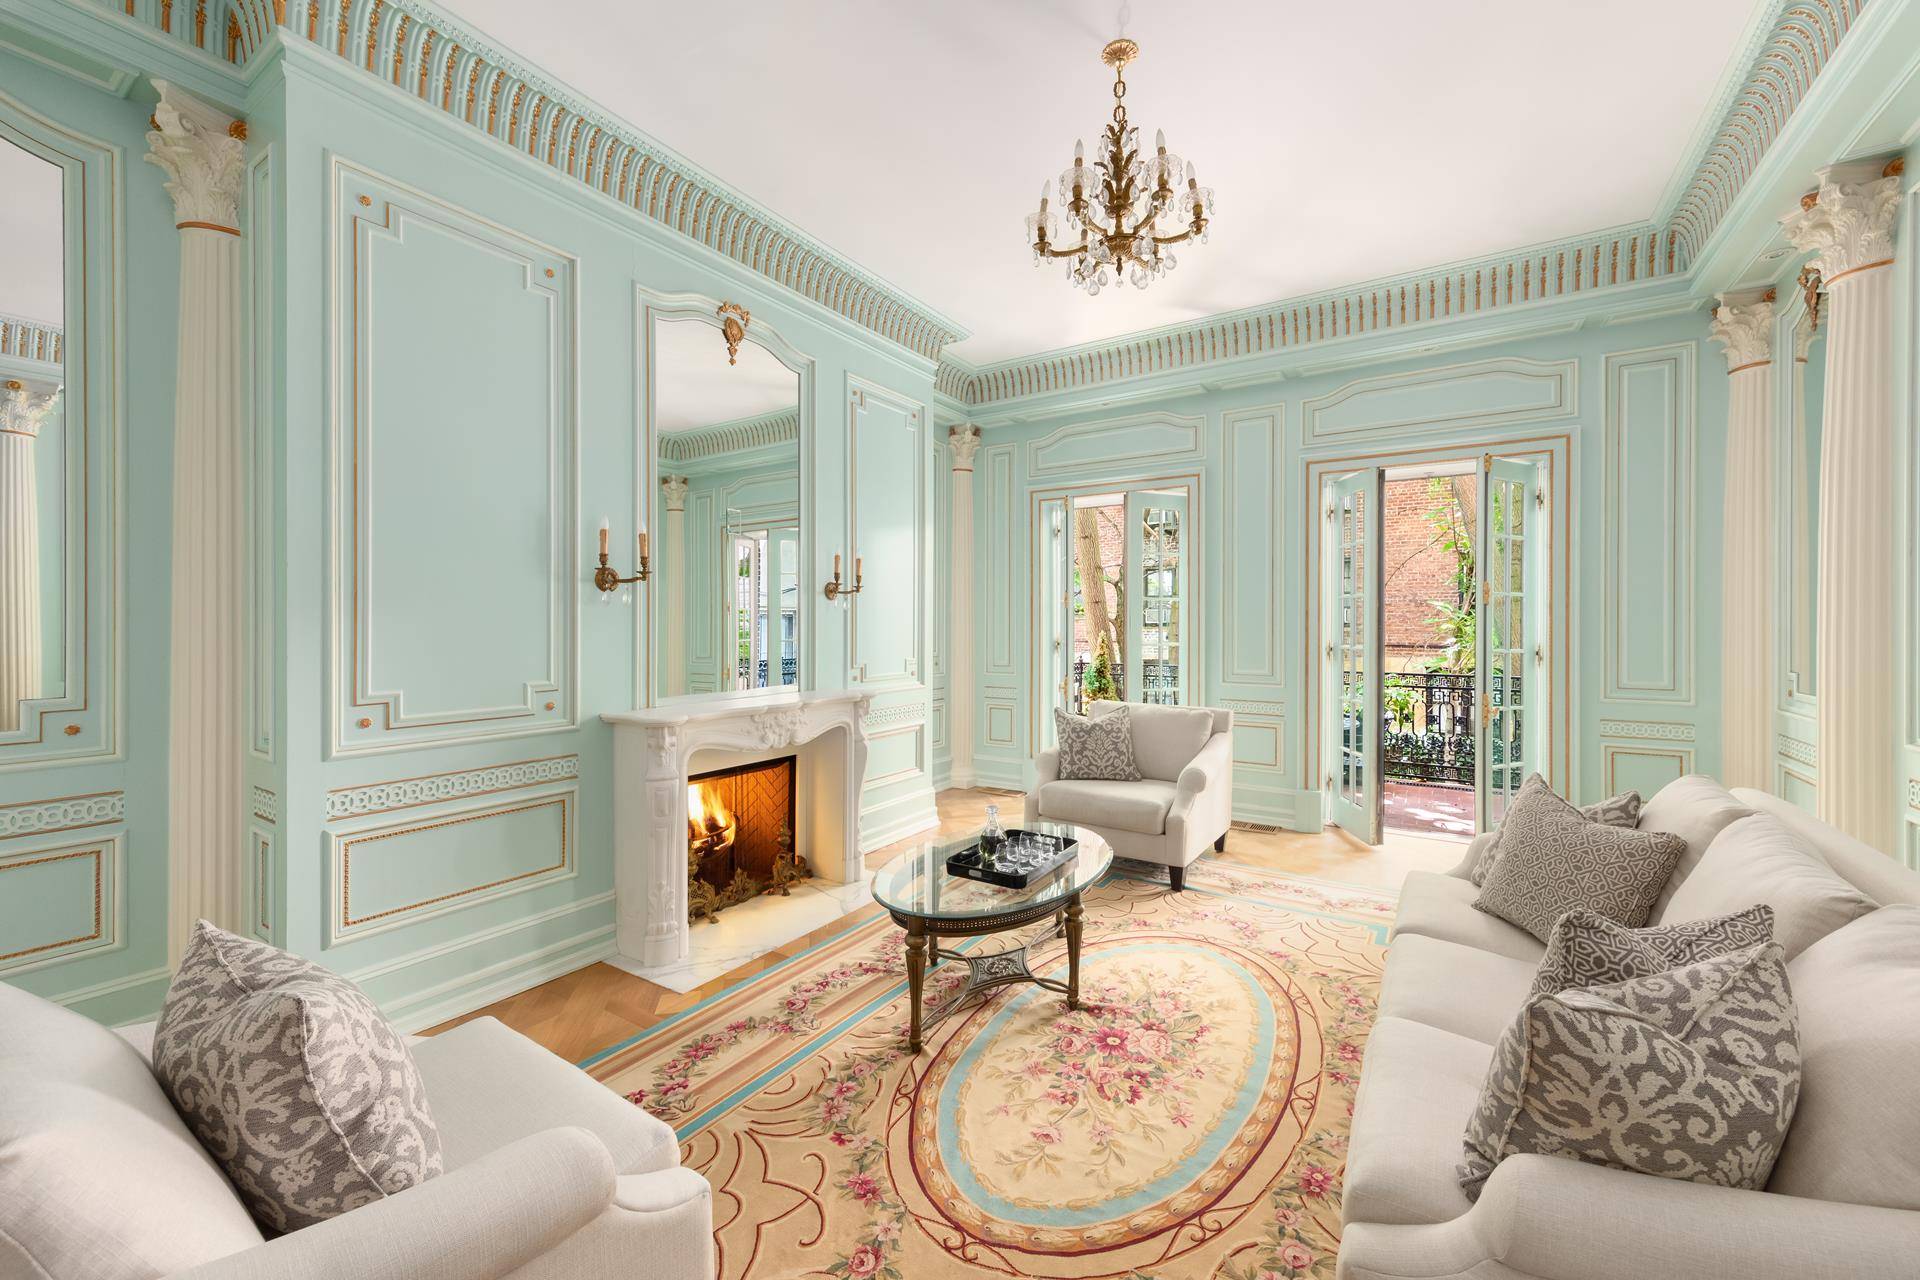 144 West 82nd Street is an exquisitely renovated wide single family house with 12 rooms, 5 6 bedrooms, 6.